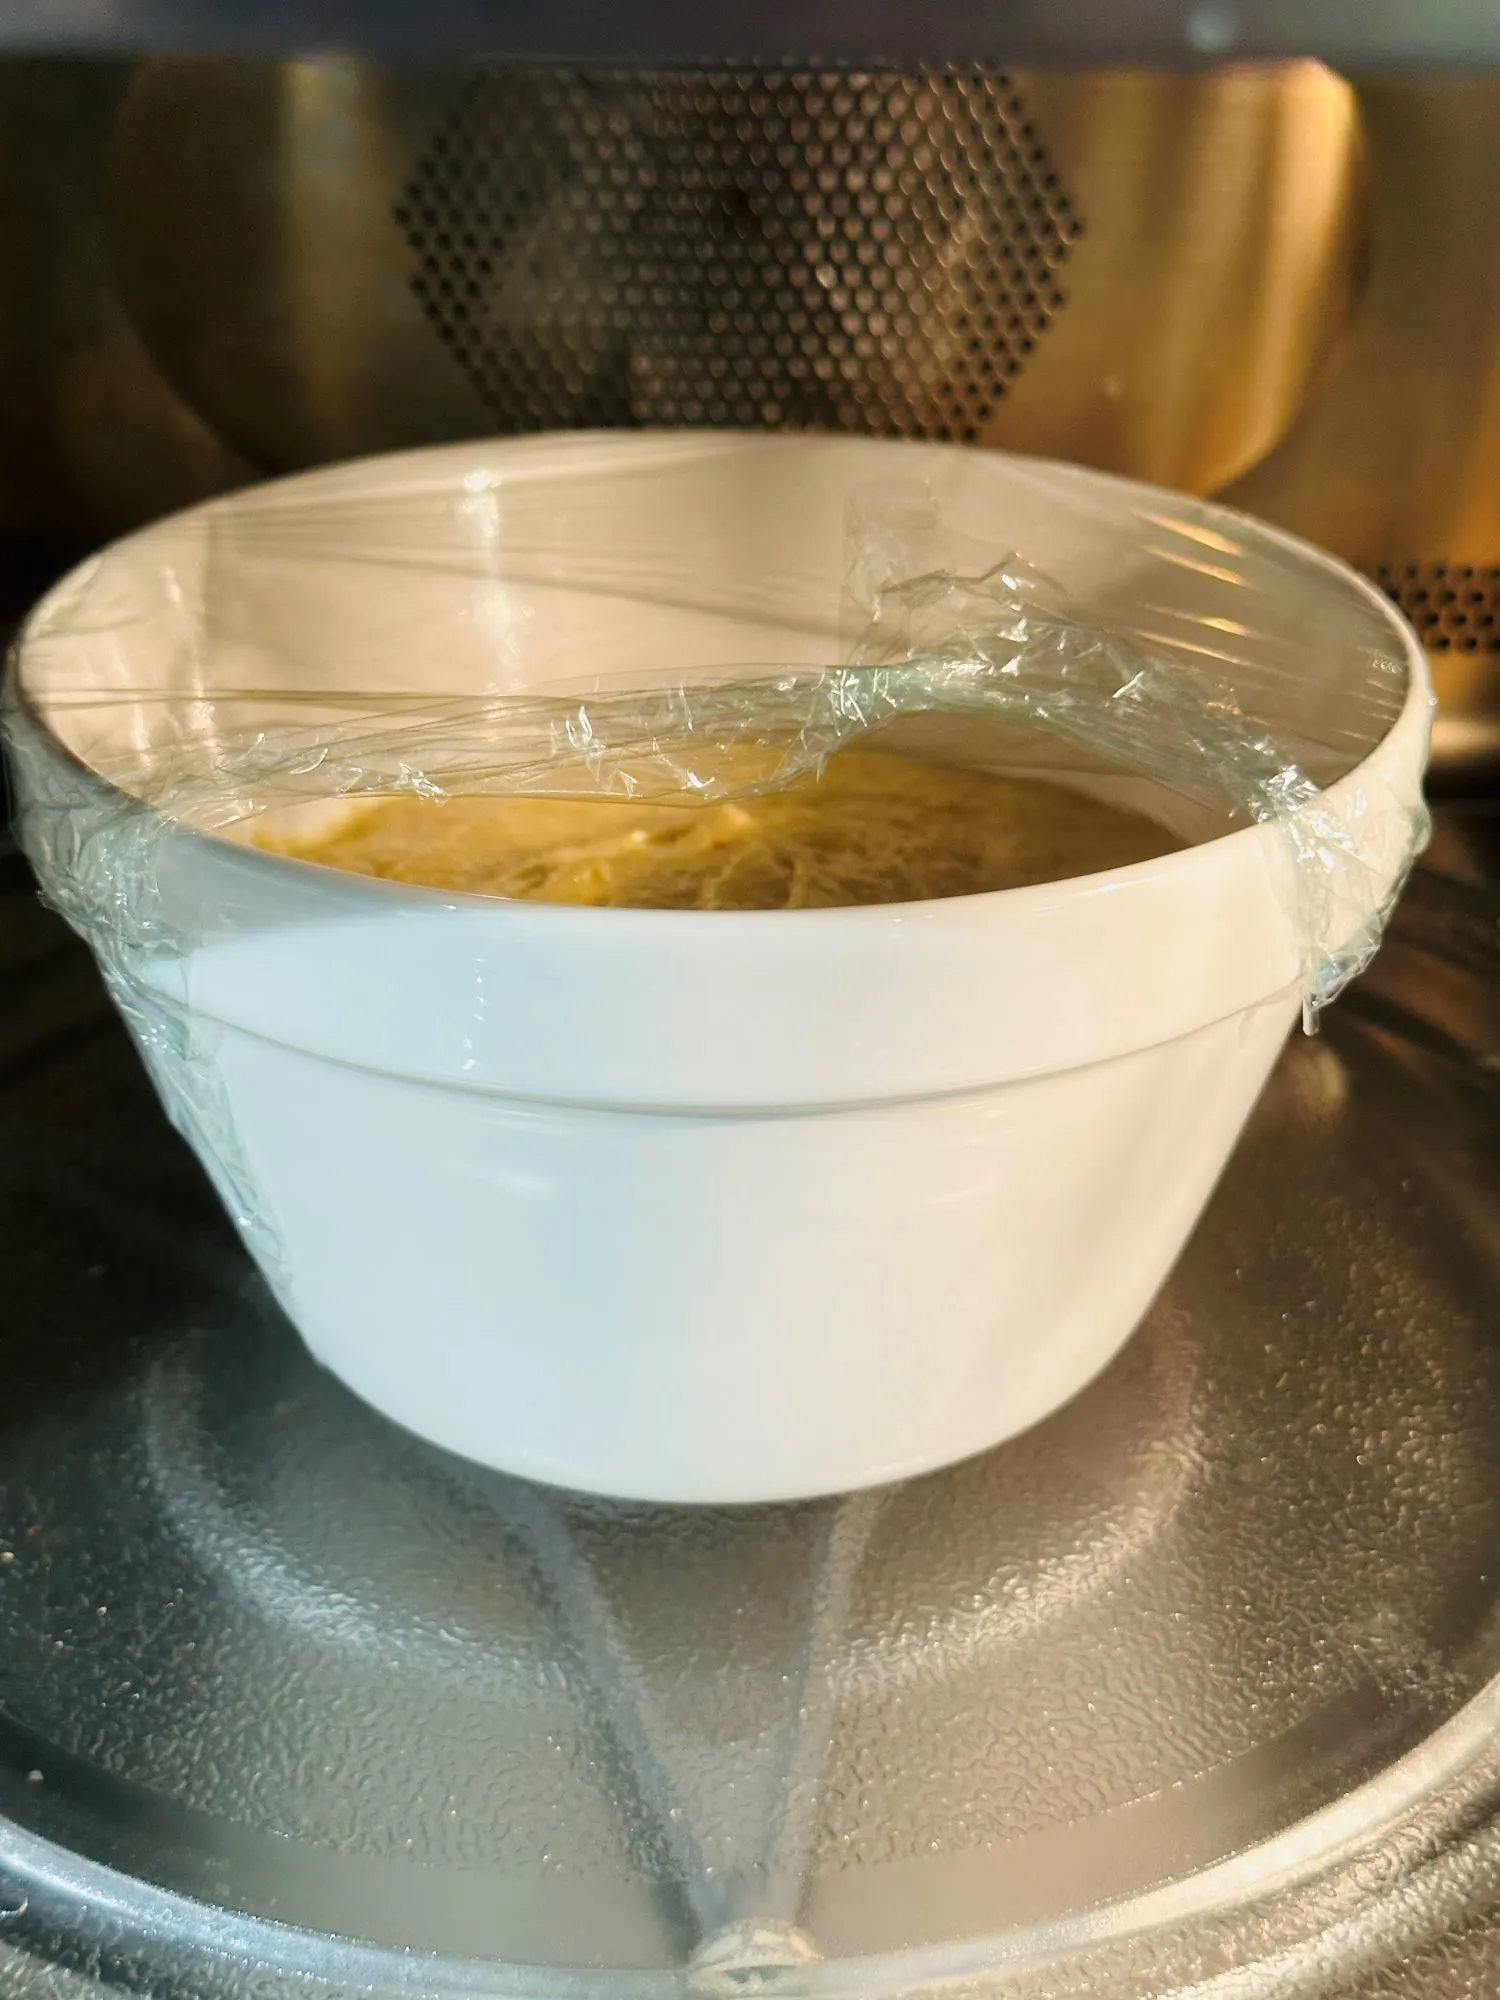 sponge pudding with cling film over it in a bowl placed in a microwave